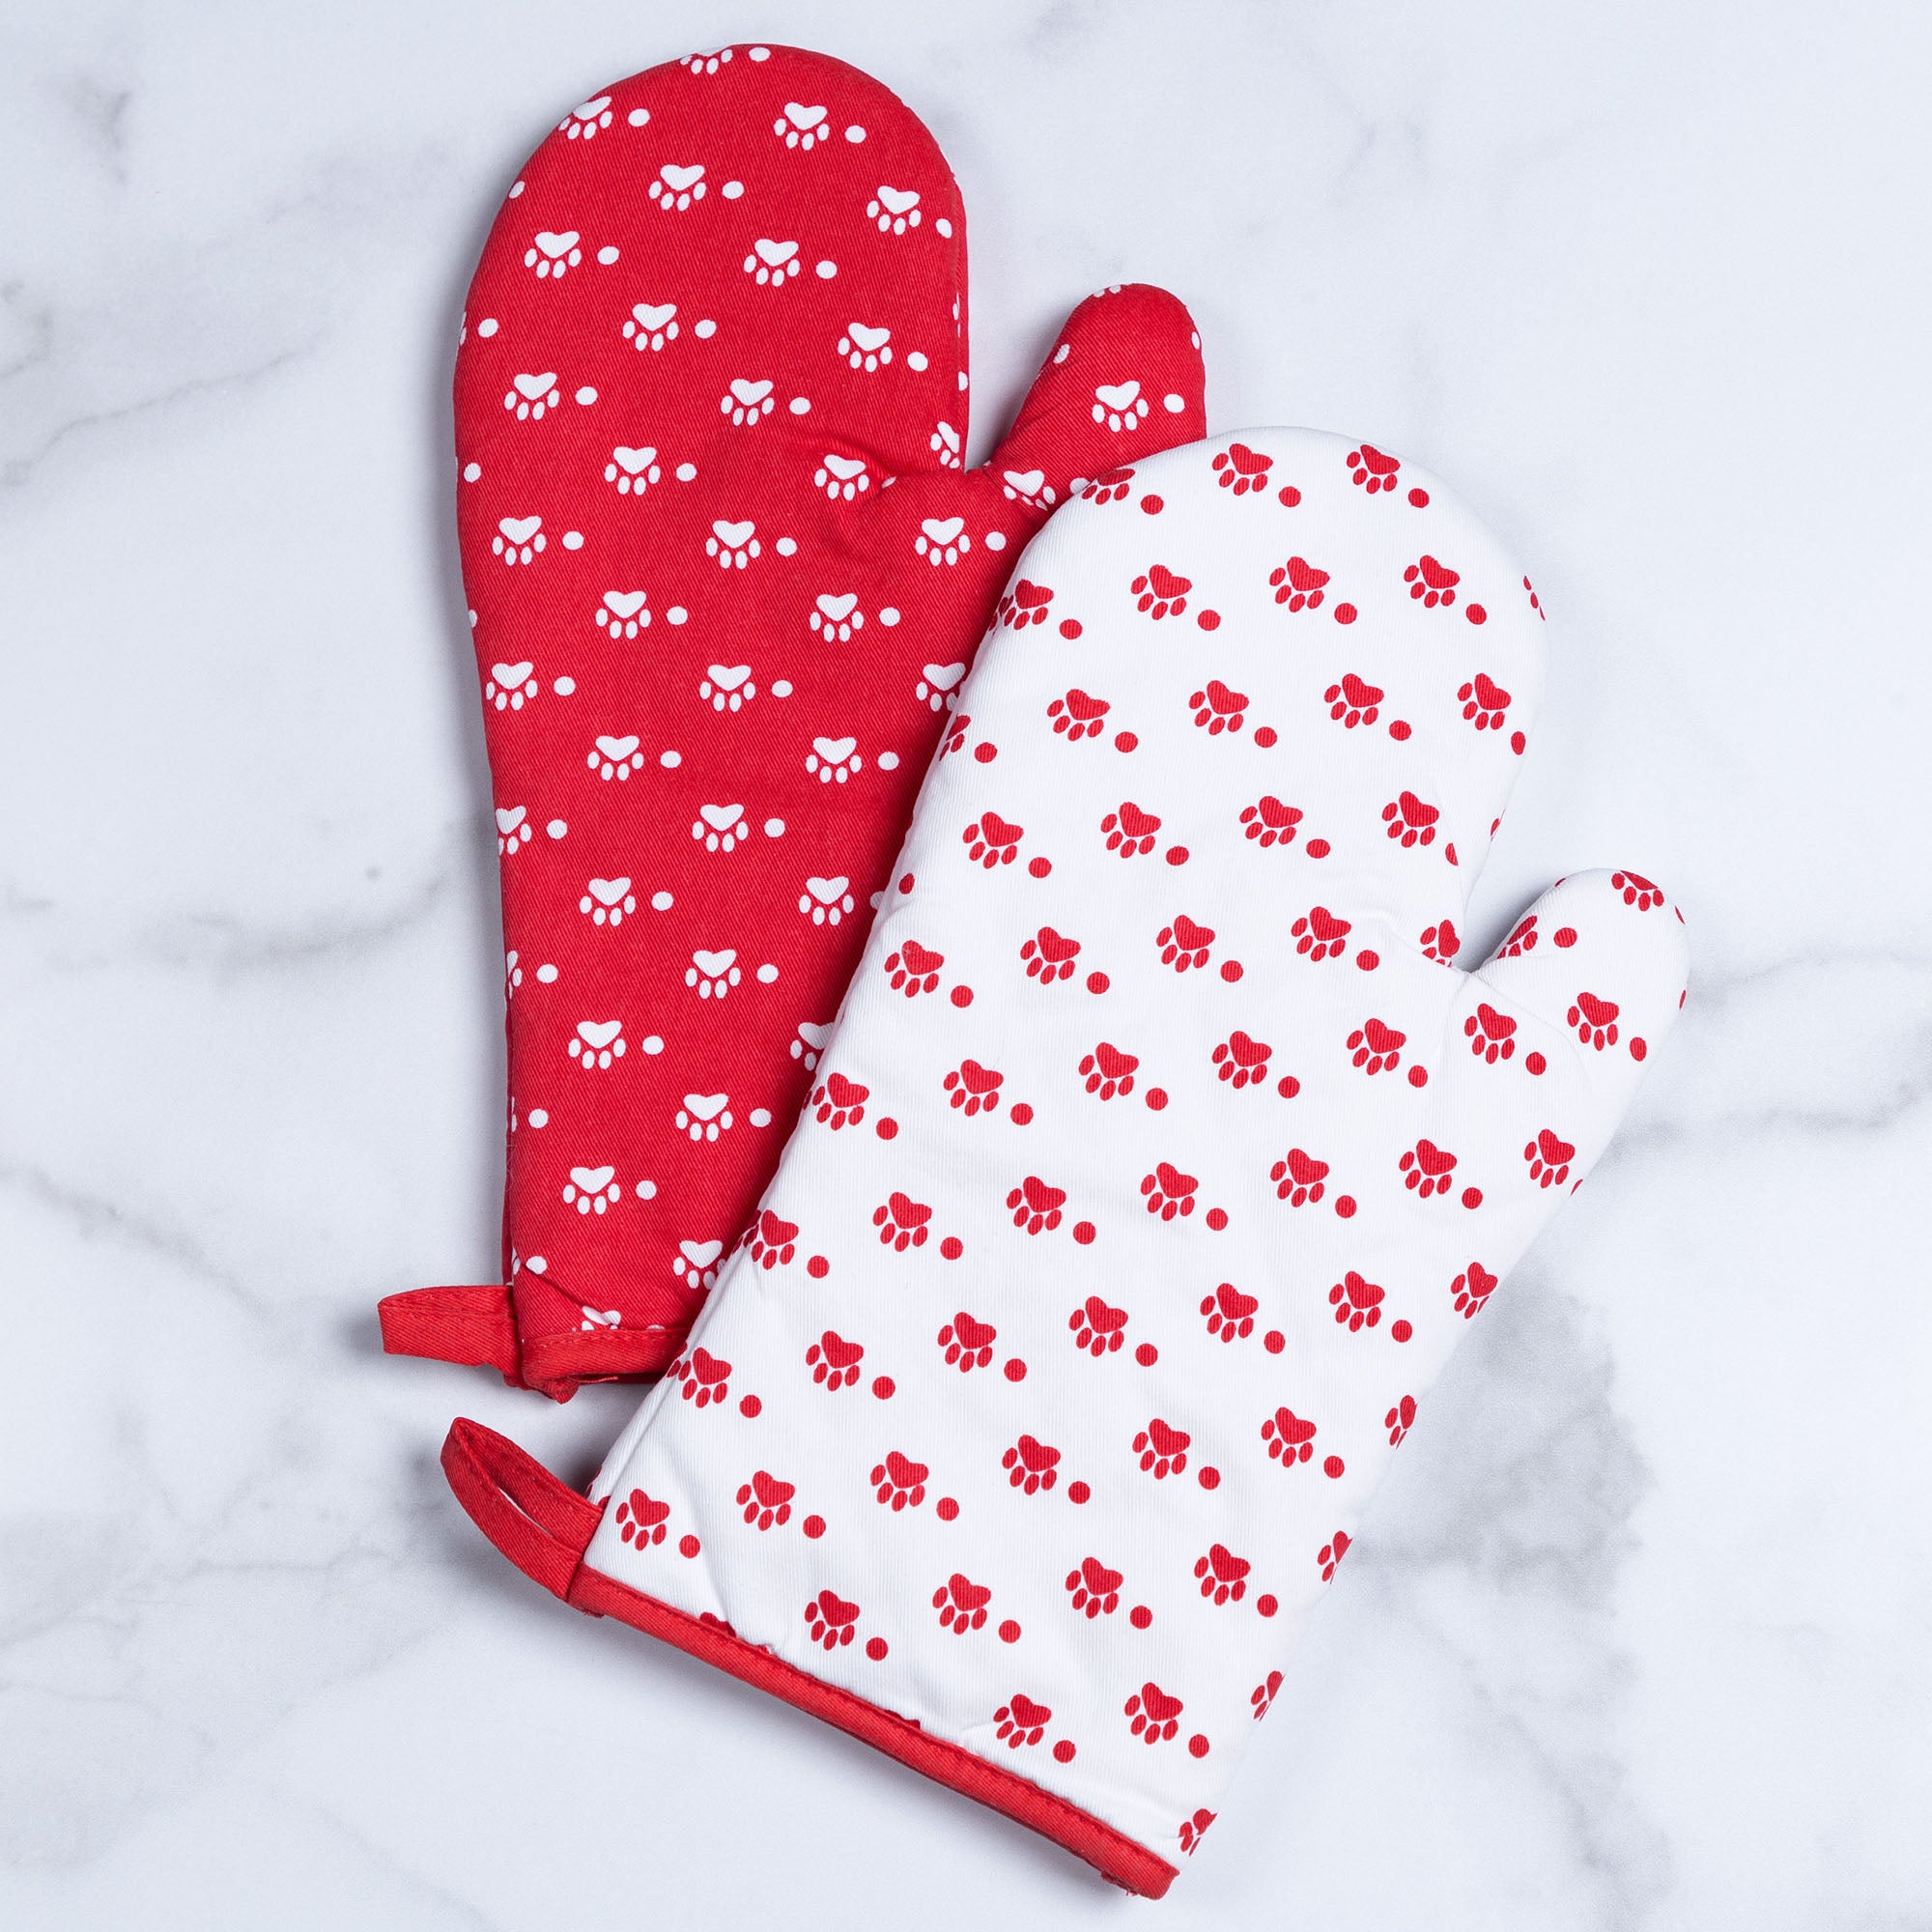 Festival Pets 100% Cotton Oven Mitts , Dog Oven Mitts , Cat Oven Mitts - Paws & Dots - Red